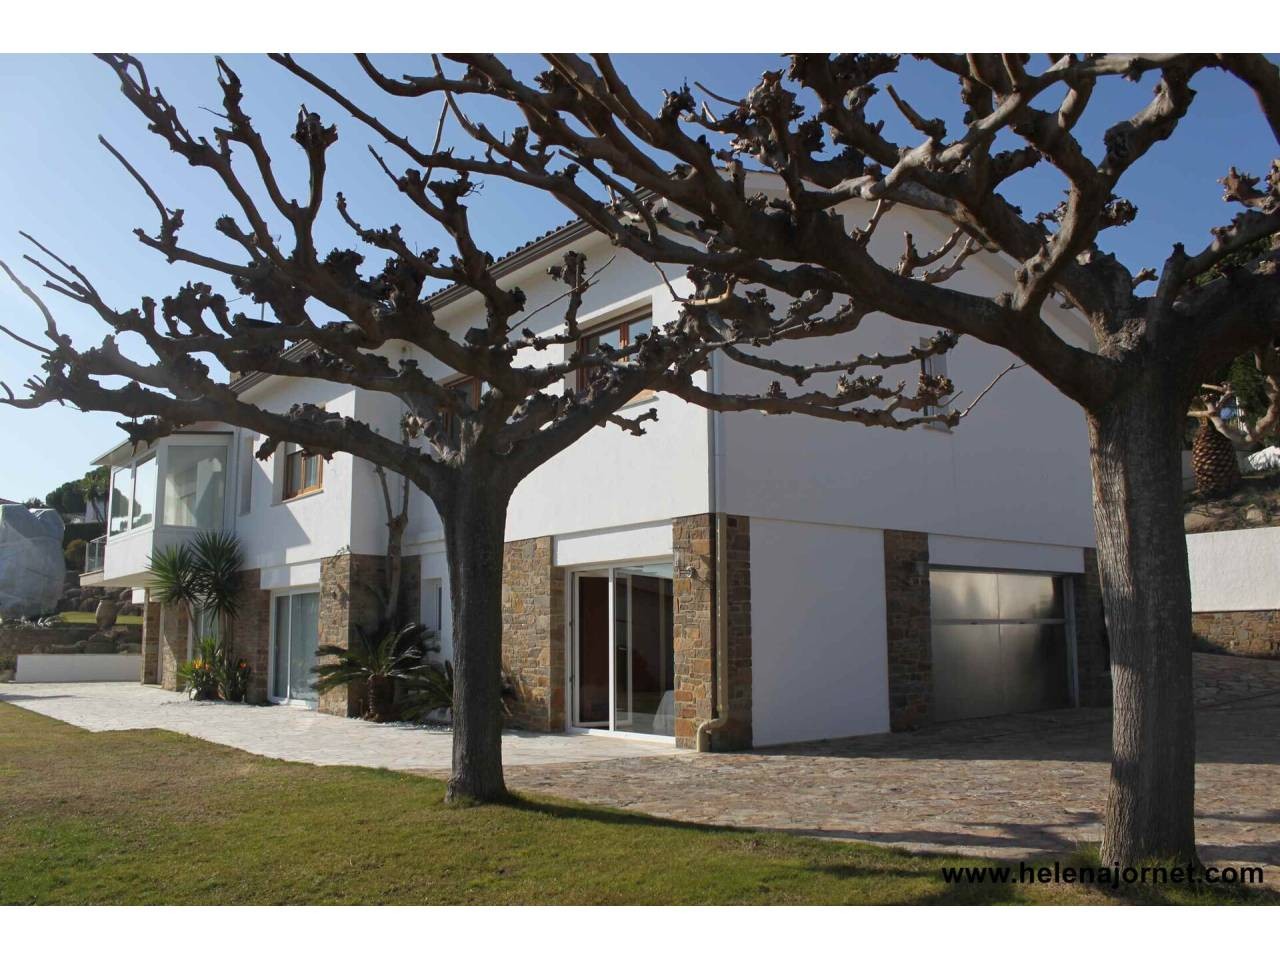 Sensational house with spectacular views to Sant Pol's bay - 2809